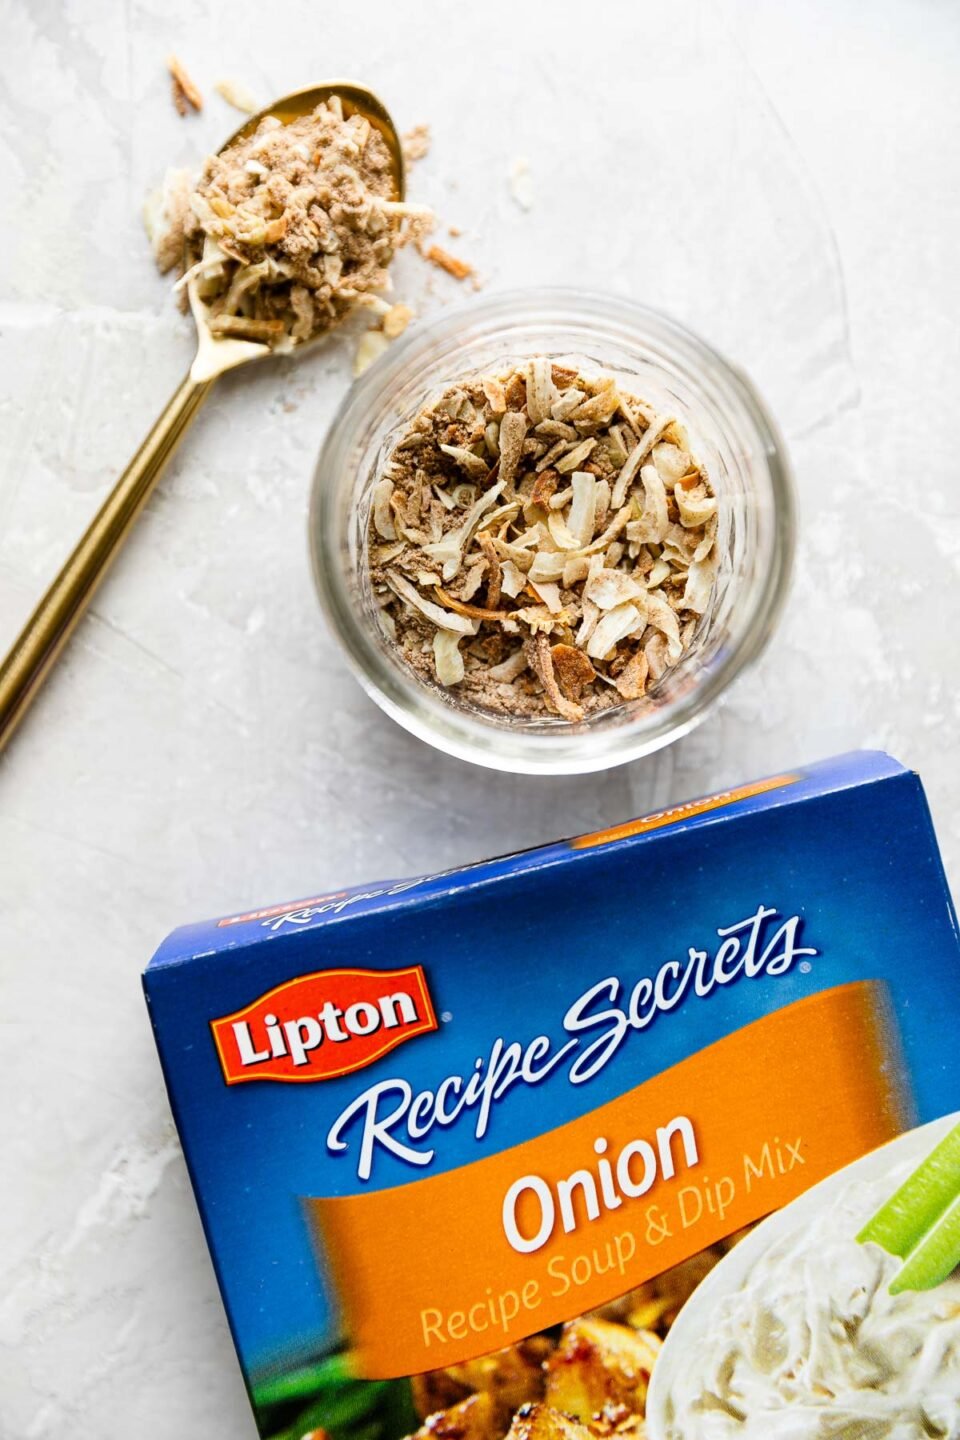 A package of Lipton dry Onion Soup Mix lays flat on a creamy white textured surface. Above the box rests a small mason jar filled with onion soup mix and a spoonful of the mix fills a small gold spoon that rests alongside the mason jar. This is one of the secret ingredients for making this dutch oven pot roast recipe.